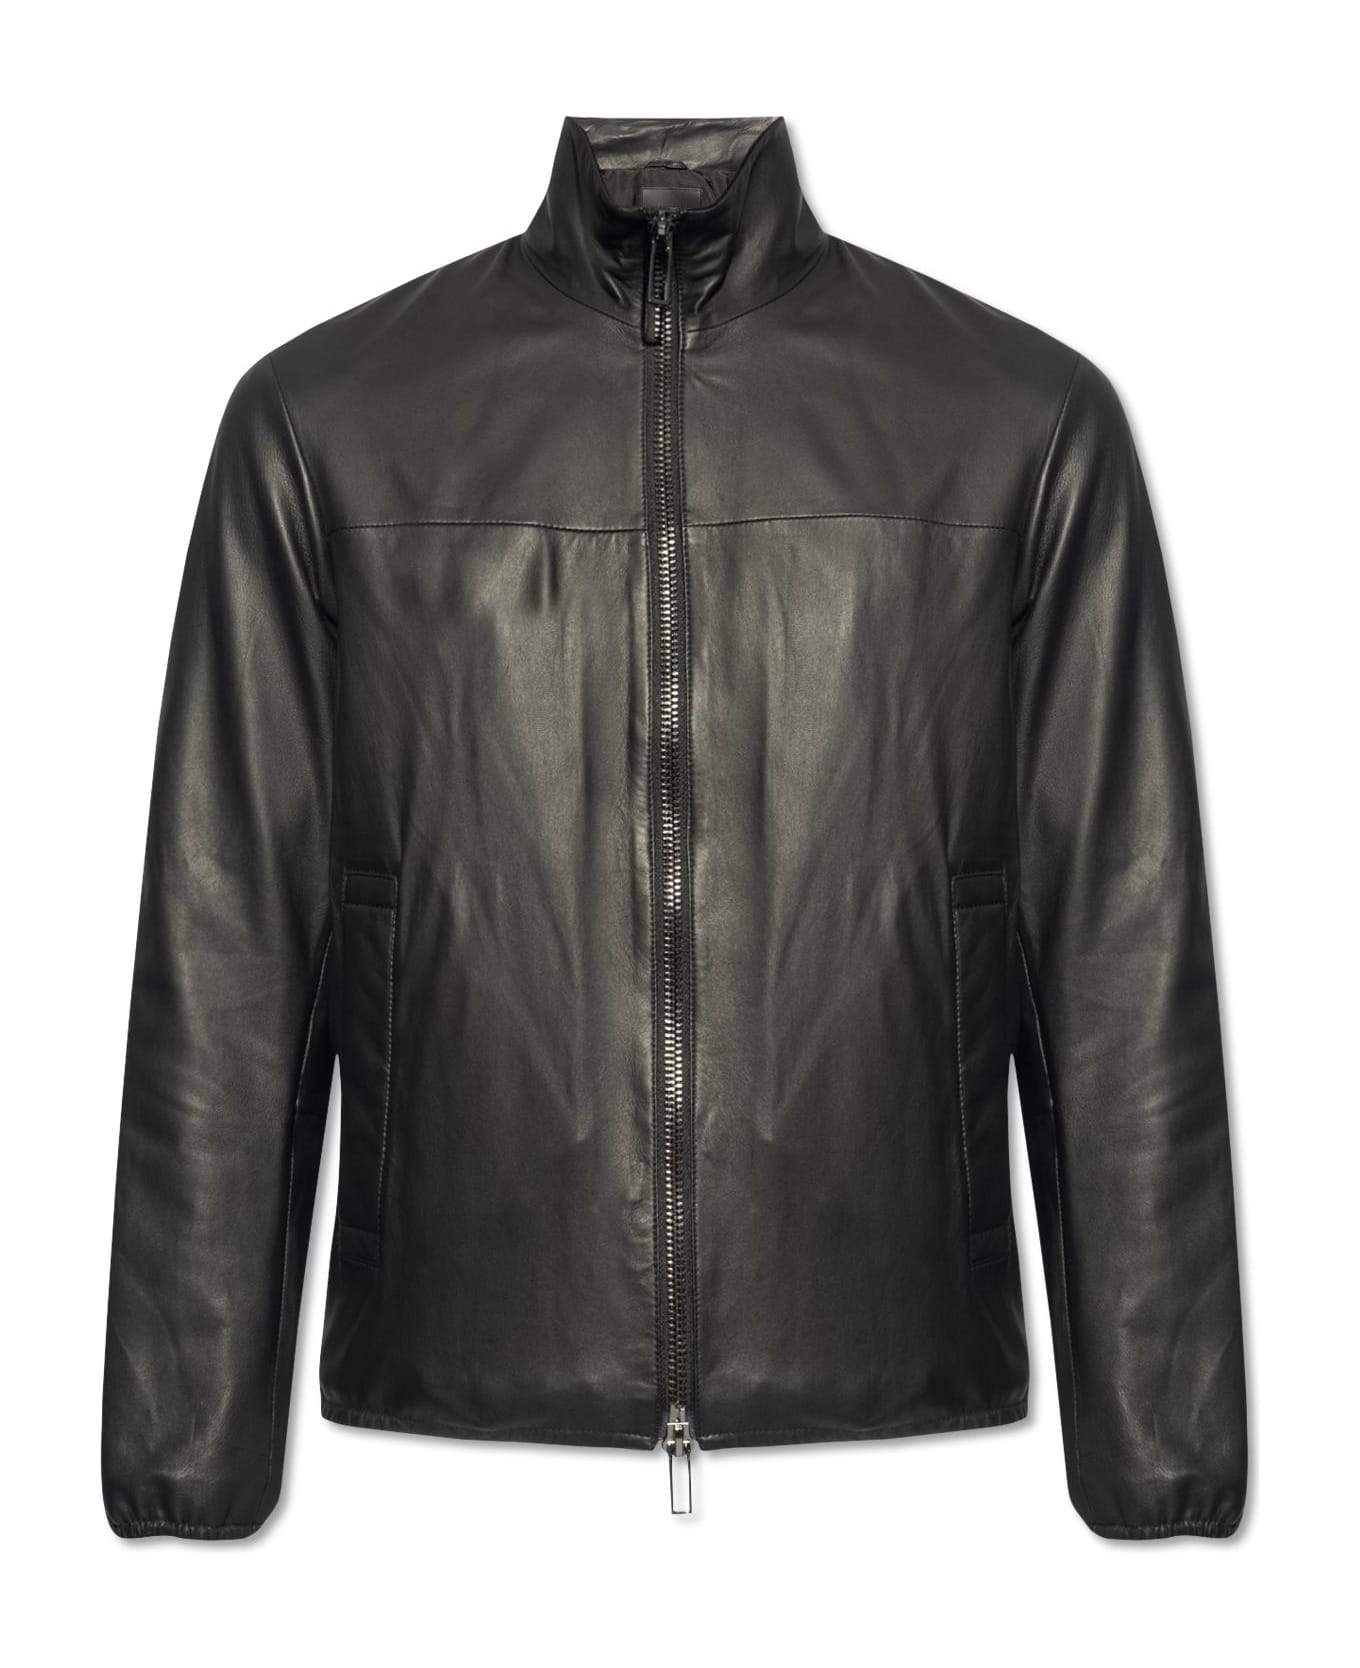 Emporio Armani Leather Jacket With Stand-up Collar - Nero